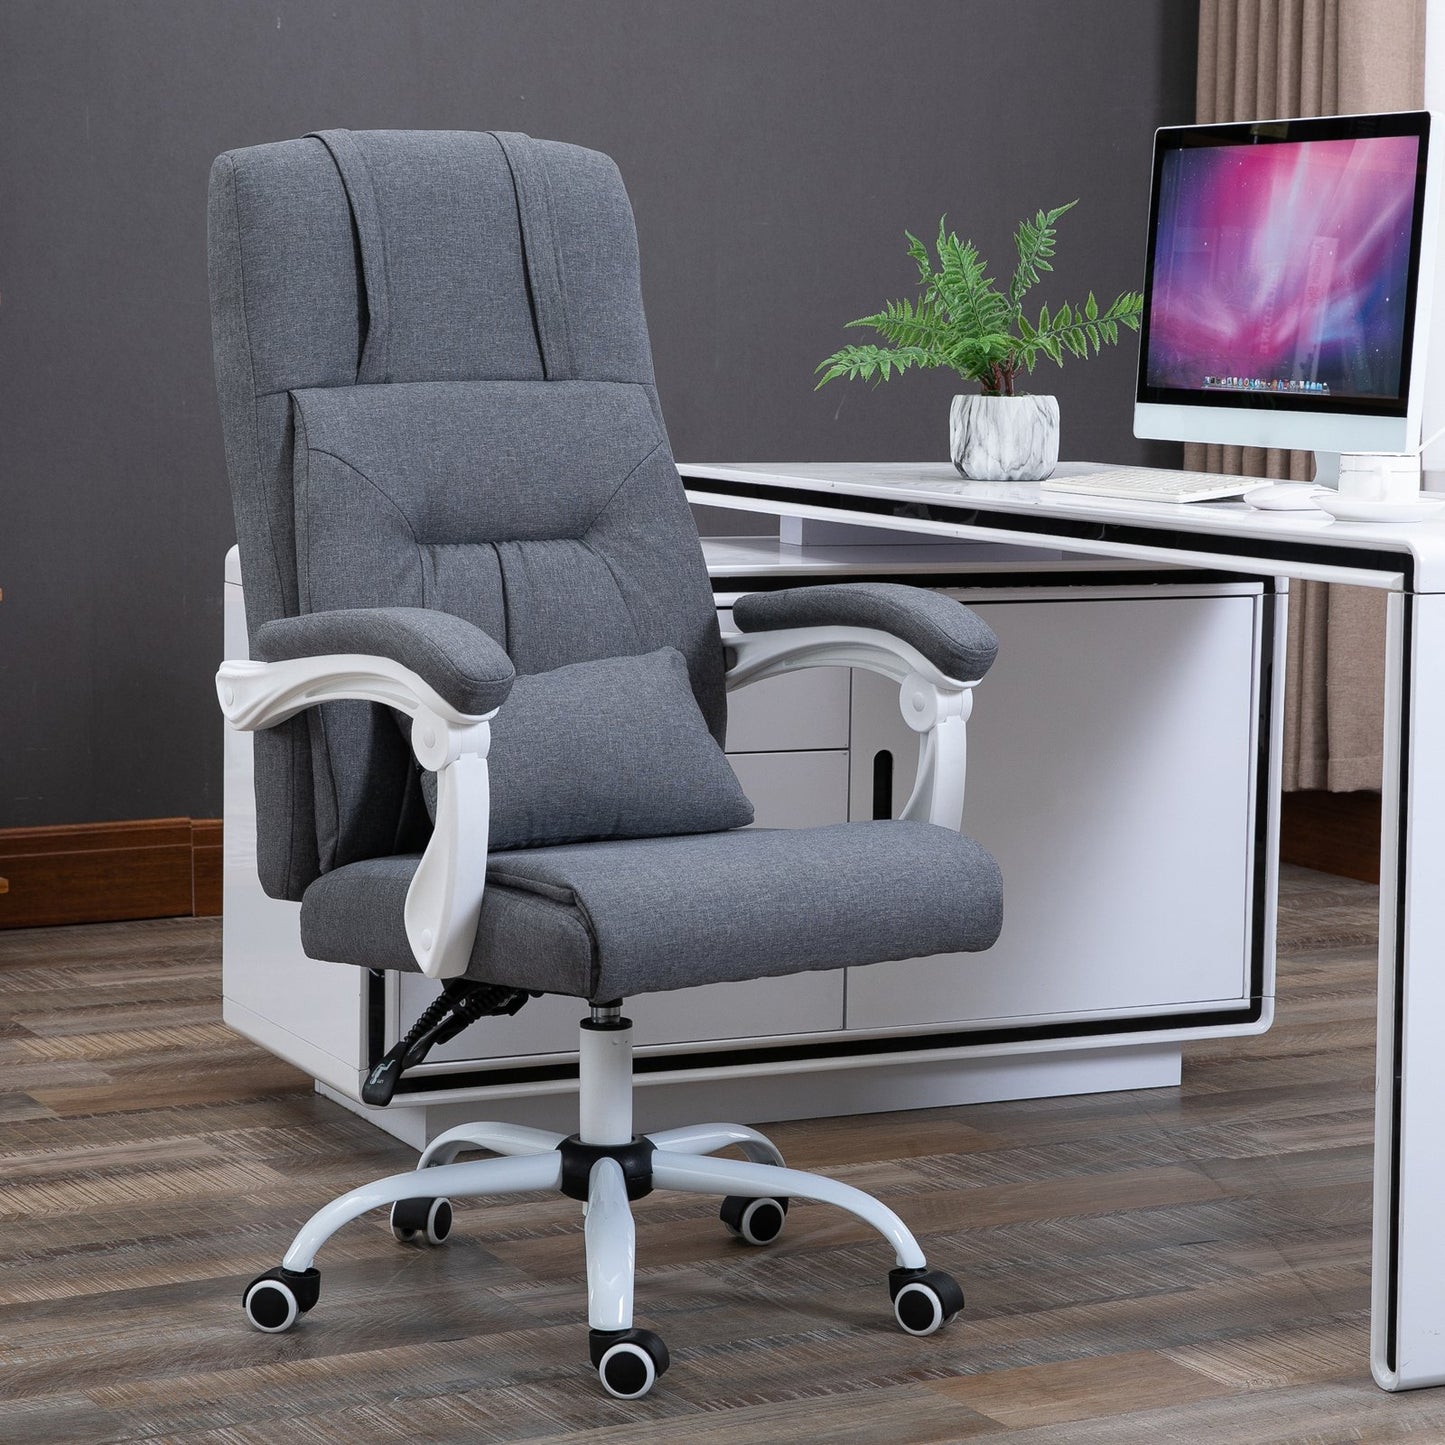 Vinsetto Office Chair Ergonomic Reclining Executive Home Office Chair w/ Pillow Grey